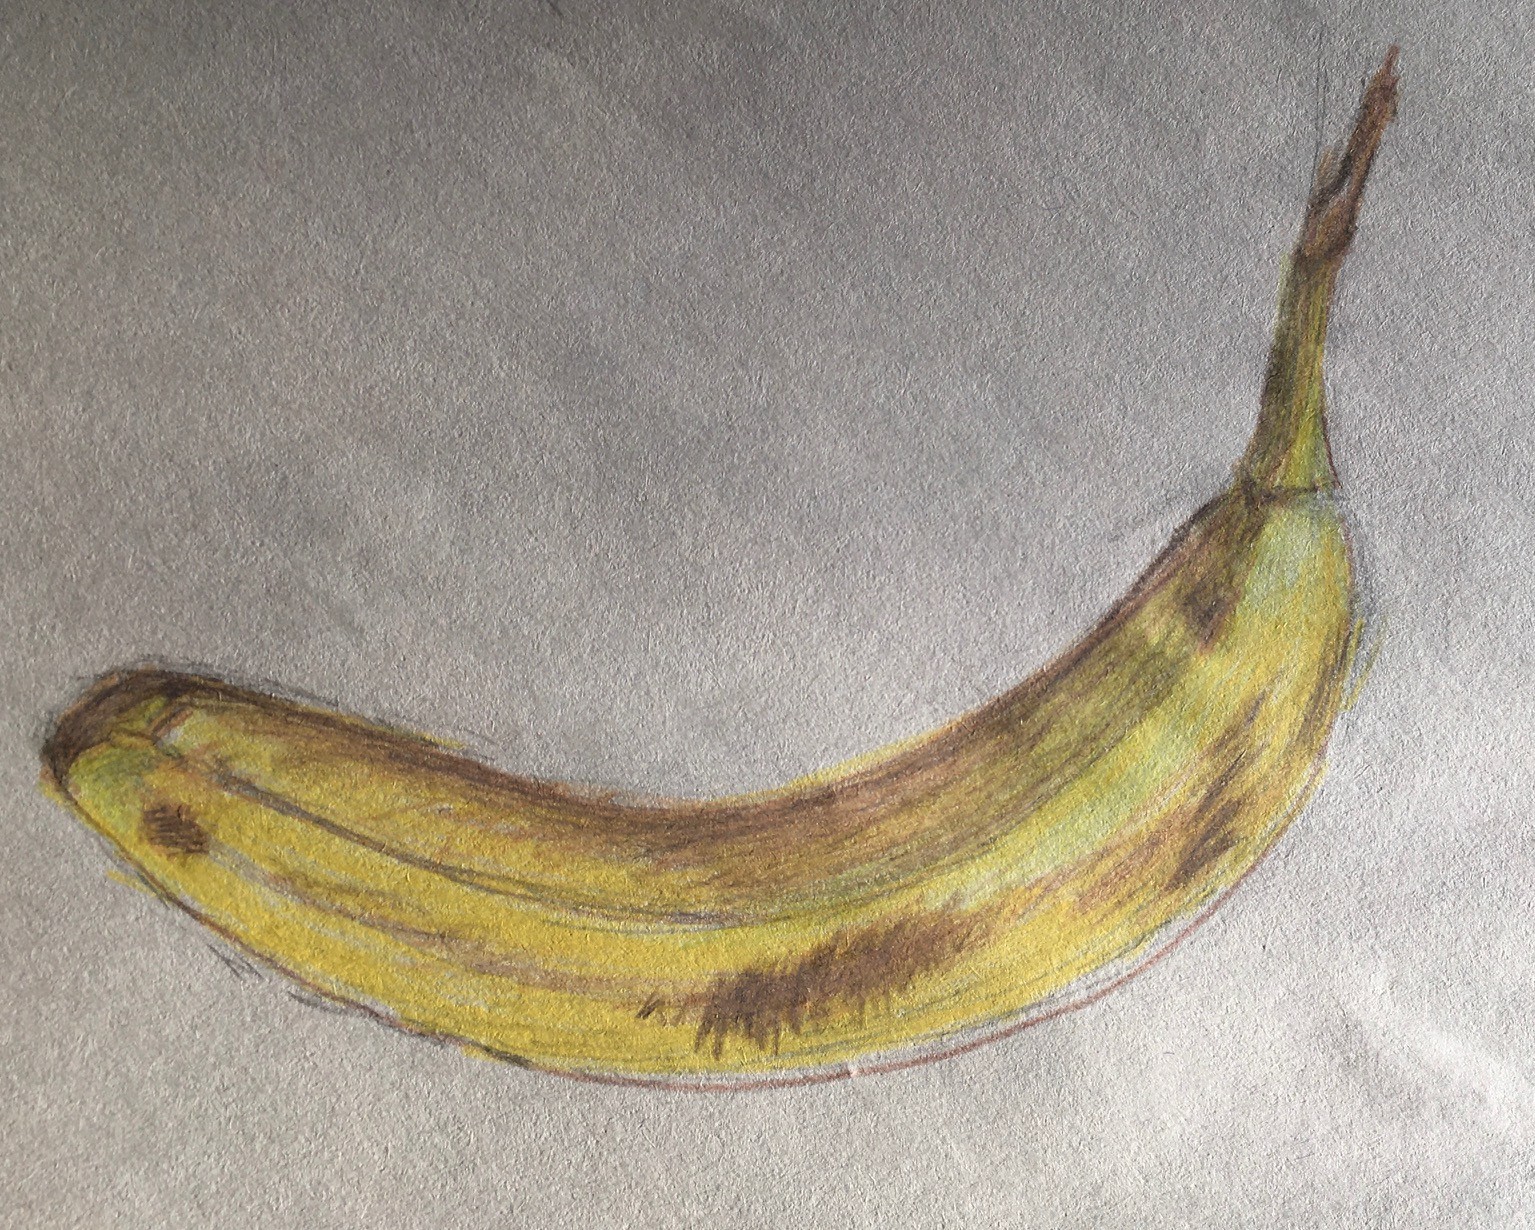 Banana, 2018
Pencil and Colored Pencil on Paper
7"W x 6.5"H, Walli White, artist